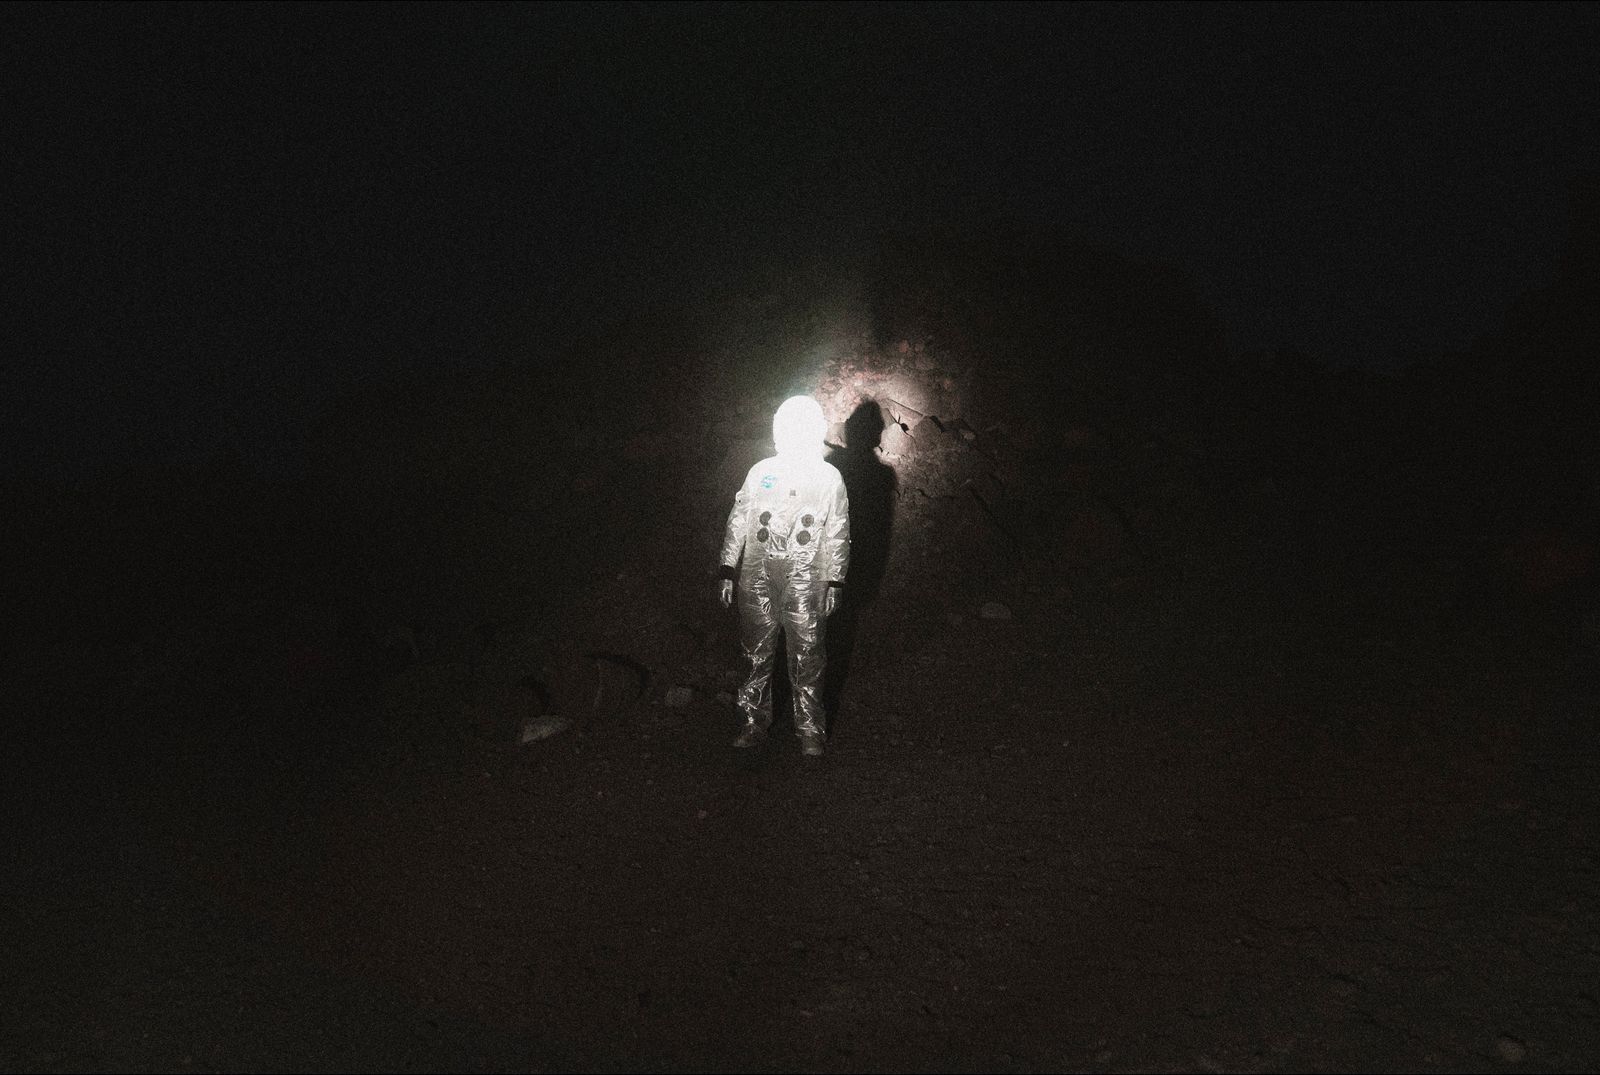 © Mackenzie Calle - I staged an image of a queer person in an astronaut suit with a beam of light, a target, on them.